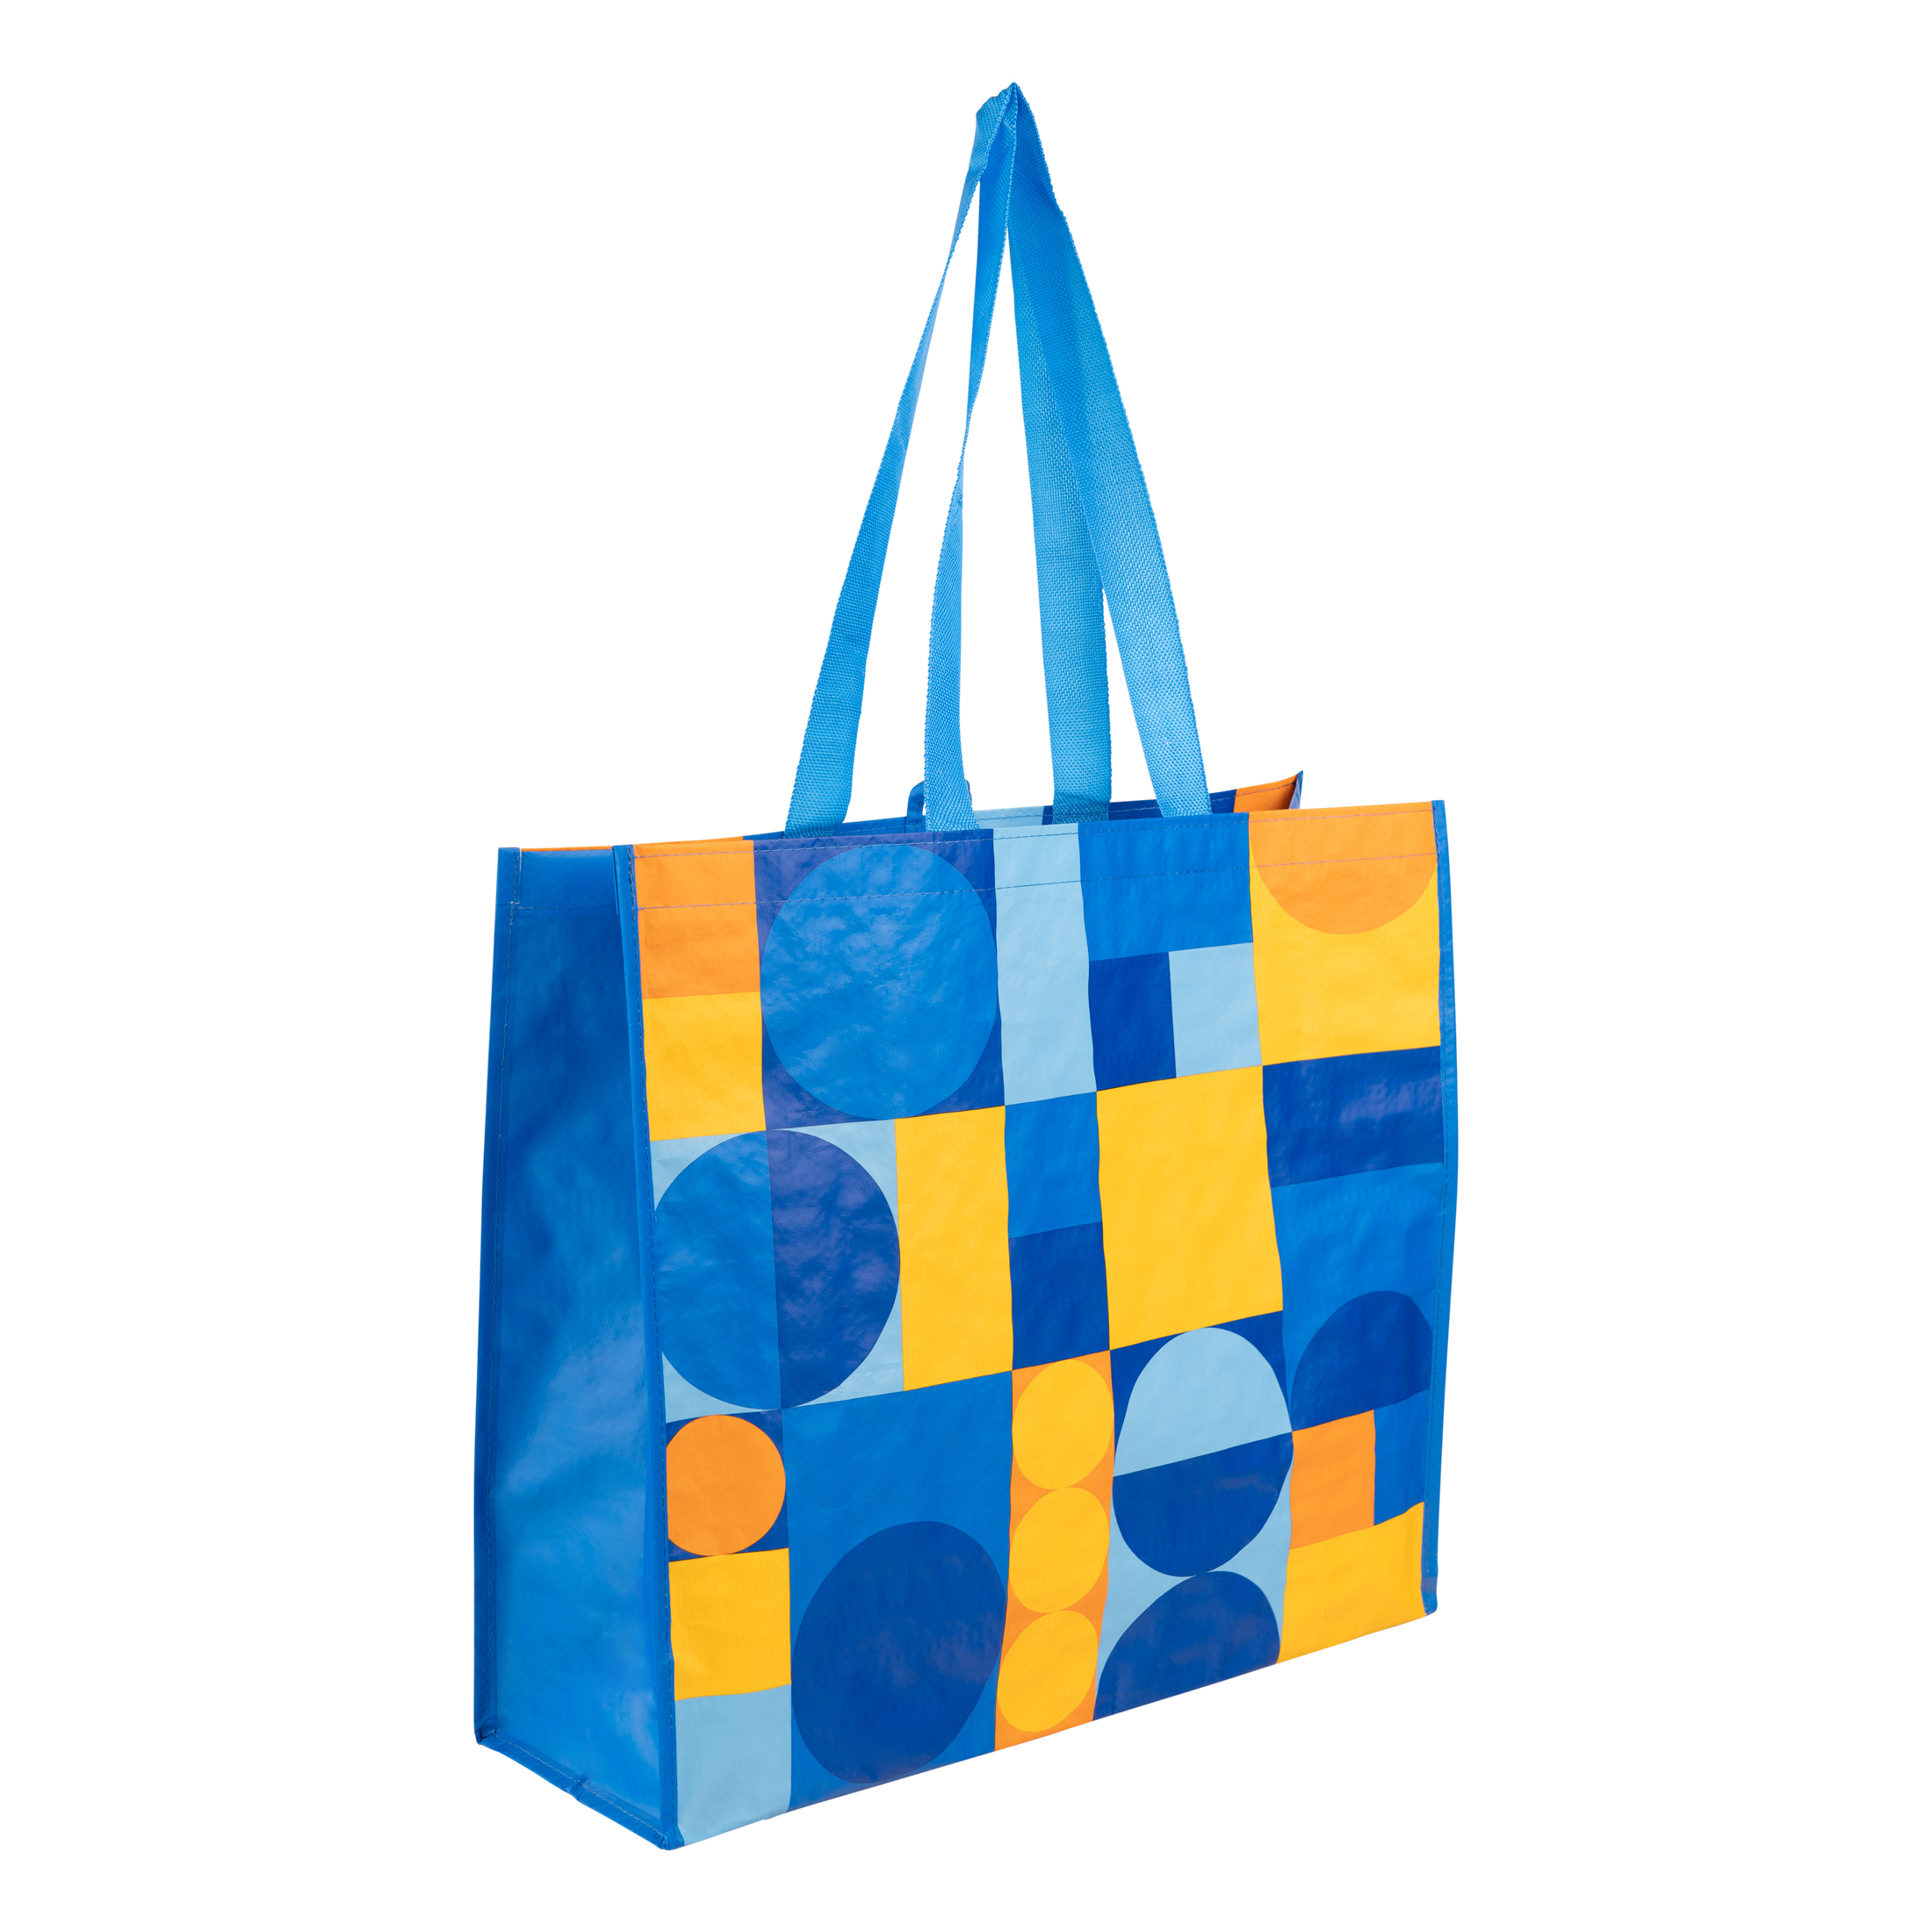 Reusable, Multi-Functional Wide Grocery Bag, Blue and Yellow Abstract Design - image 5 of 5